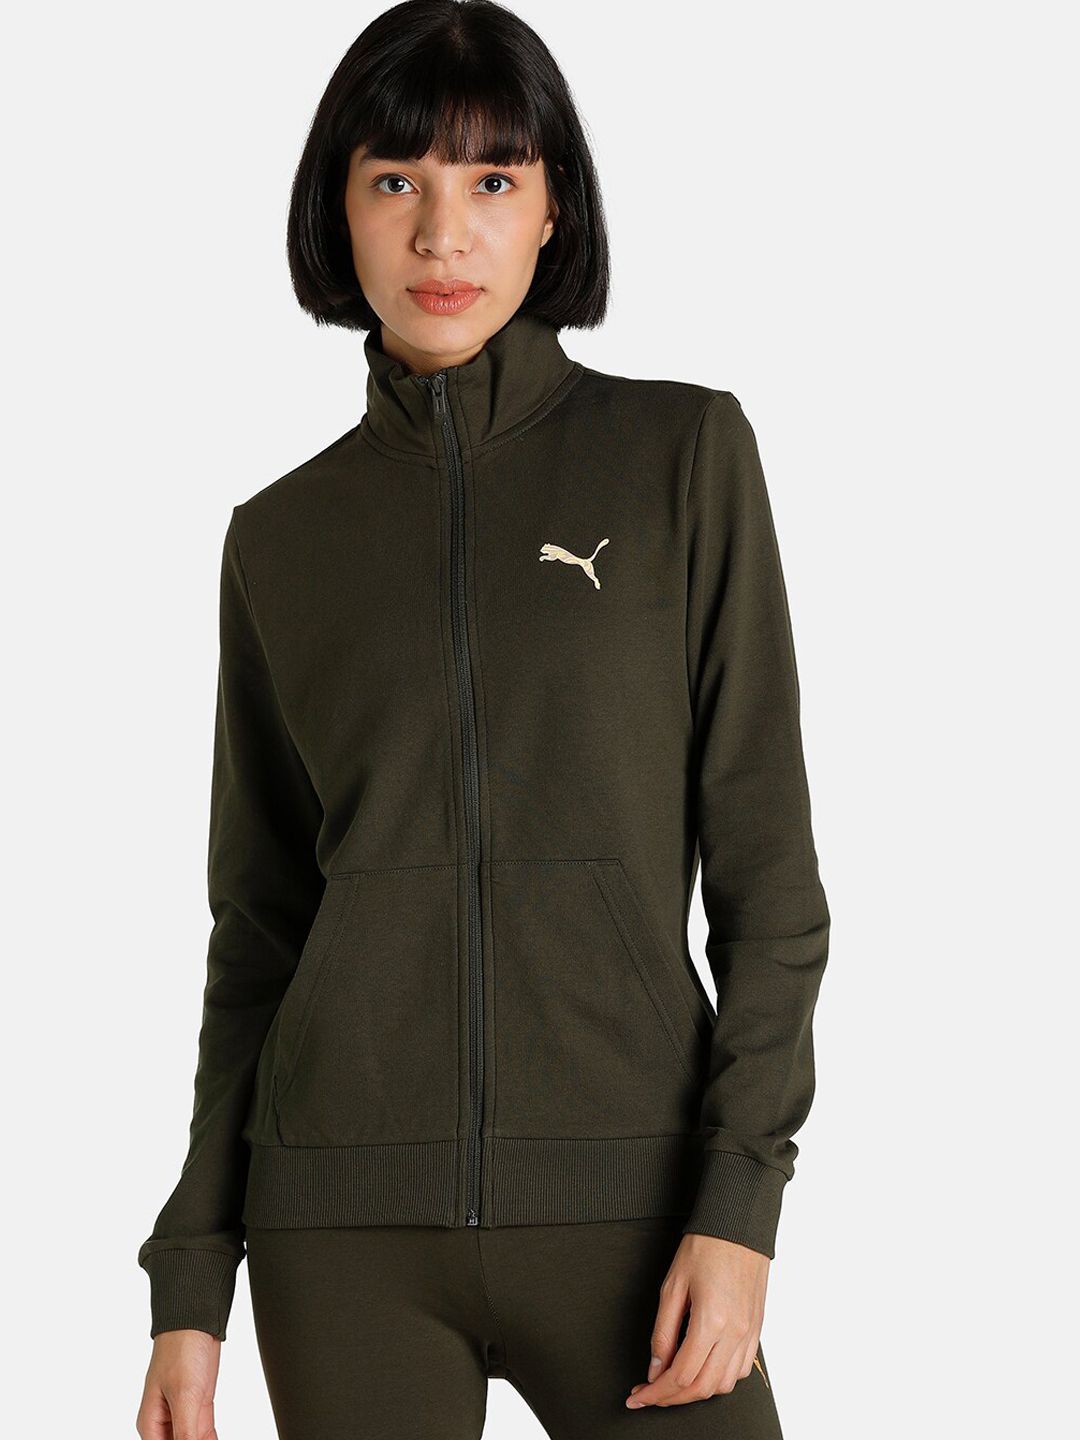 Puma Women Green Solid Graphic Jacket Price in India